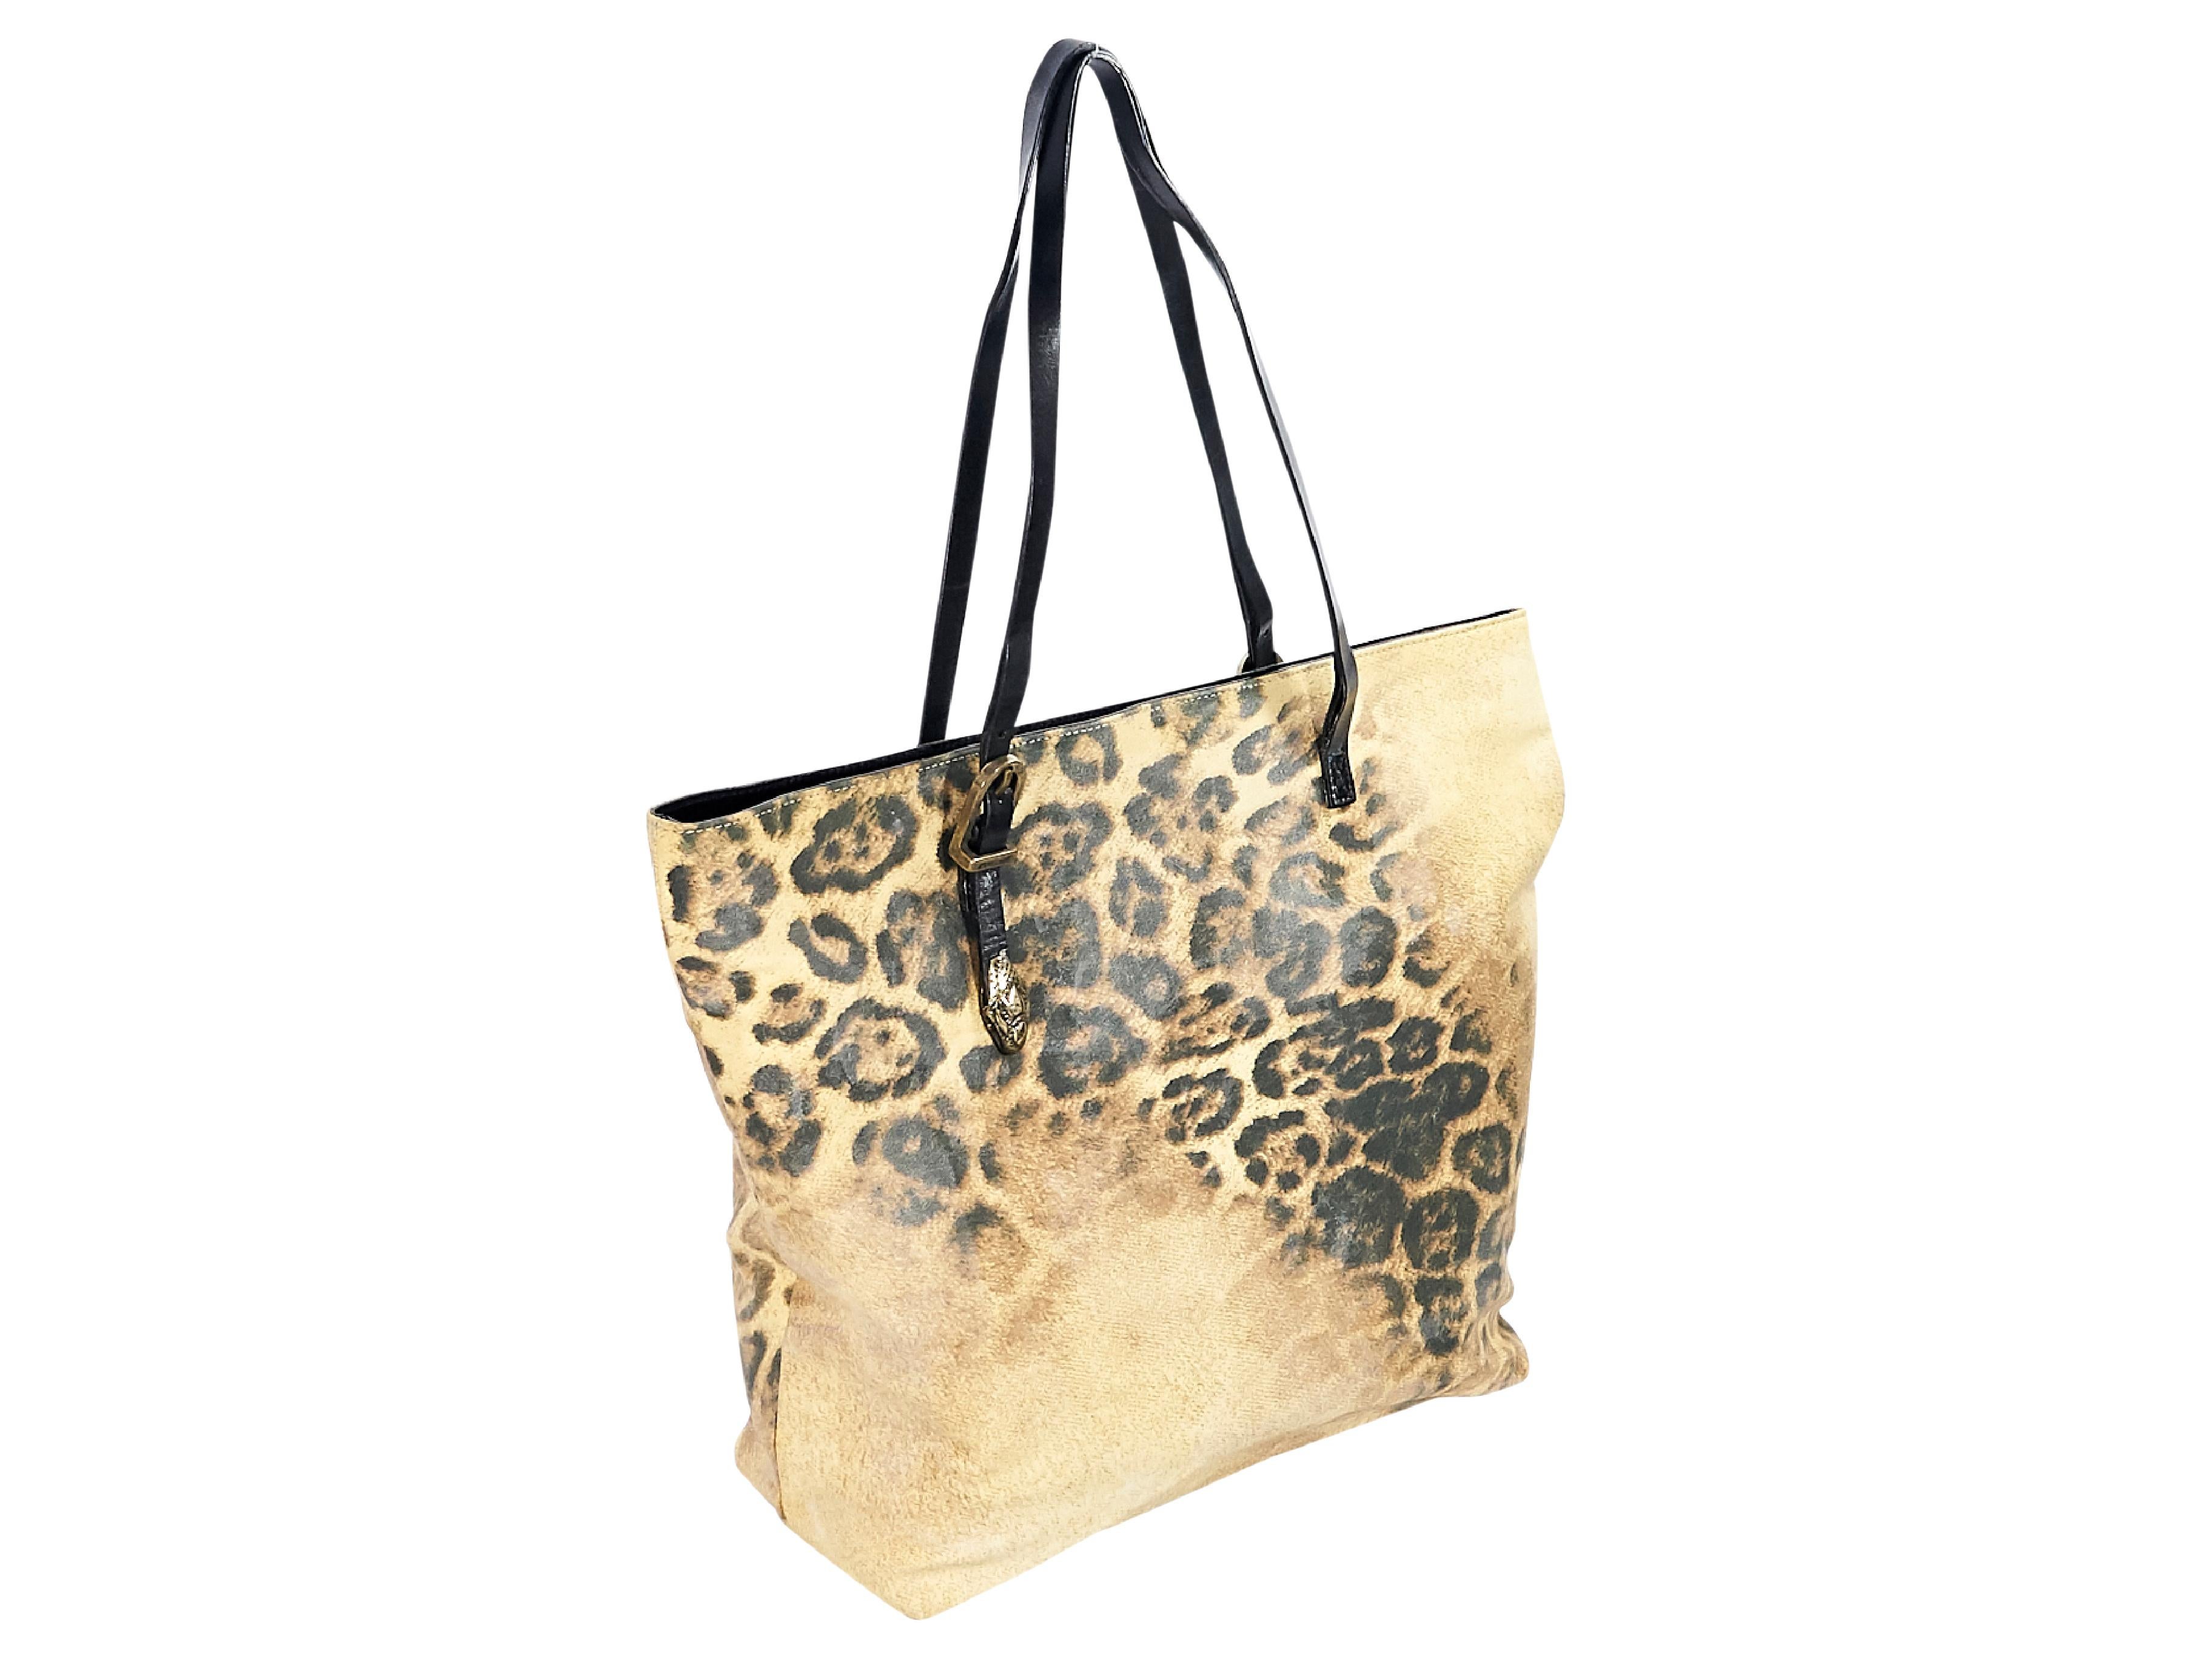 Product details:  Multicolor leopard-print leather and canvas tote bag by Roberto Cavalli.  Accented with whipstitched trim.  Dual shoulder straps.  Magnetic snap closure.  Lined interior with inner slide and zip pockets.  Goldtone hardware.  14